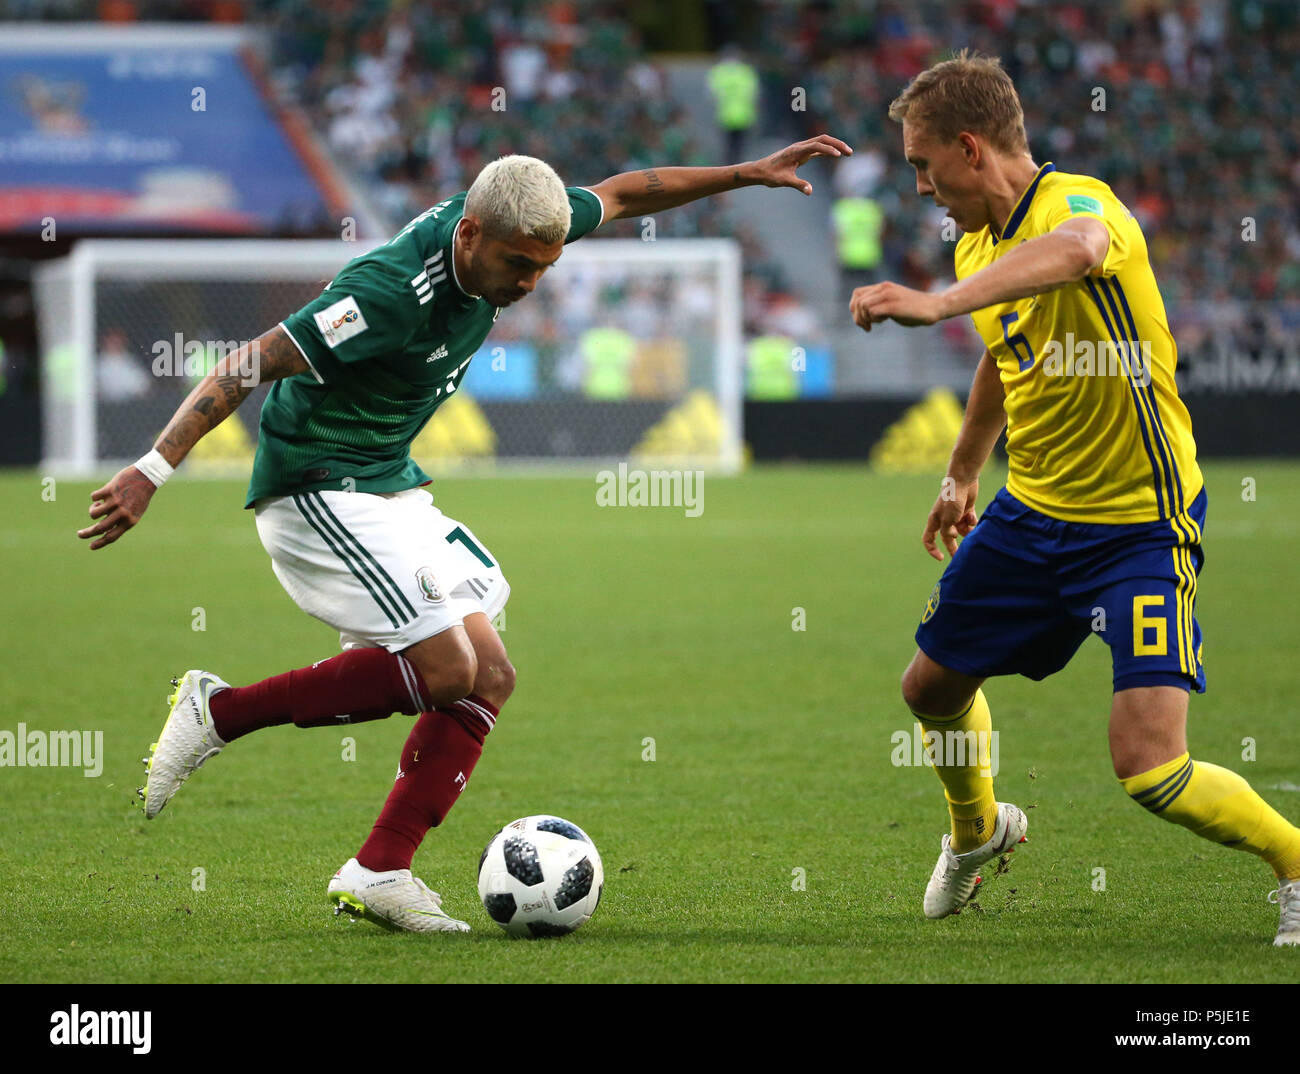 Yekaterinburg, Russia. 27th June, 2018. Jesus Corona (L) of Mexico vies with Ludwig Augustinsson of Sweden during the 2018 FIFA World Cup Group F match between Mexico and Sweden in Yekaterinburg, Russia, June 27, 2018. Sweden won 3-0. Mexico and Sweden advanced to the round of 16. Credit: Li Ming/Xinhua/Alamy Live News Stock Photo